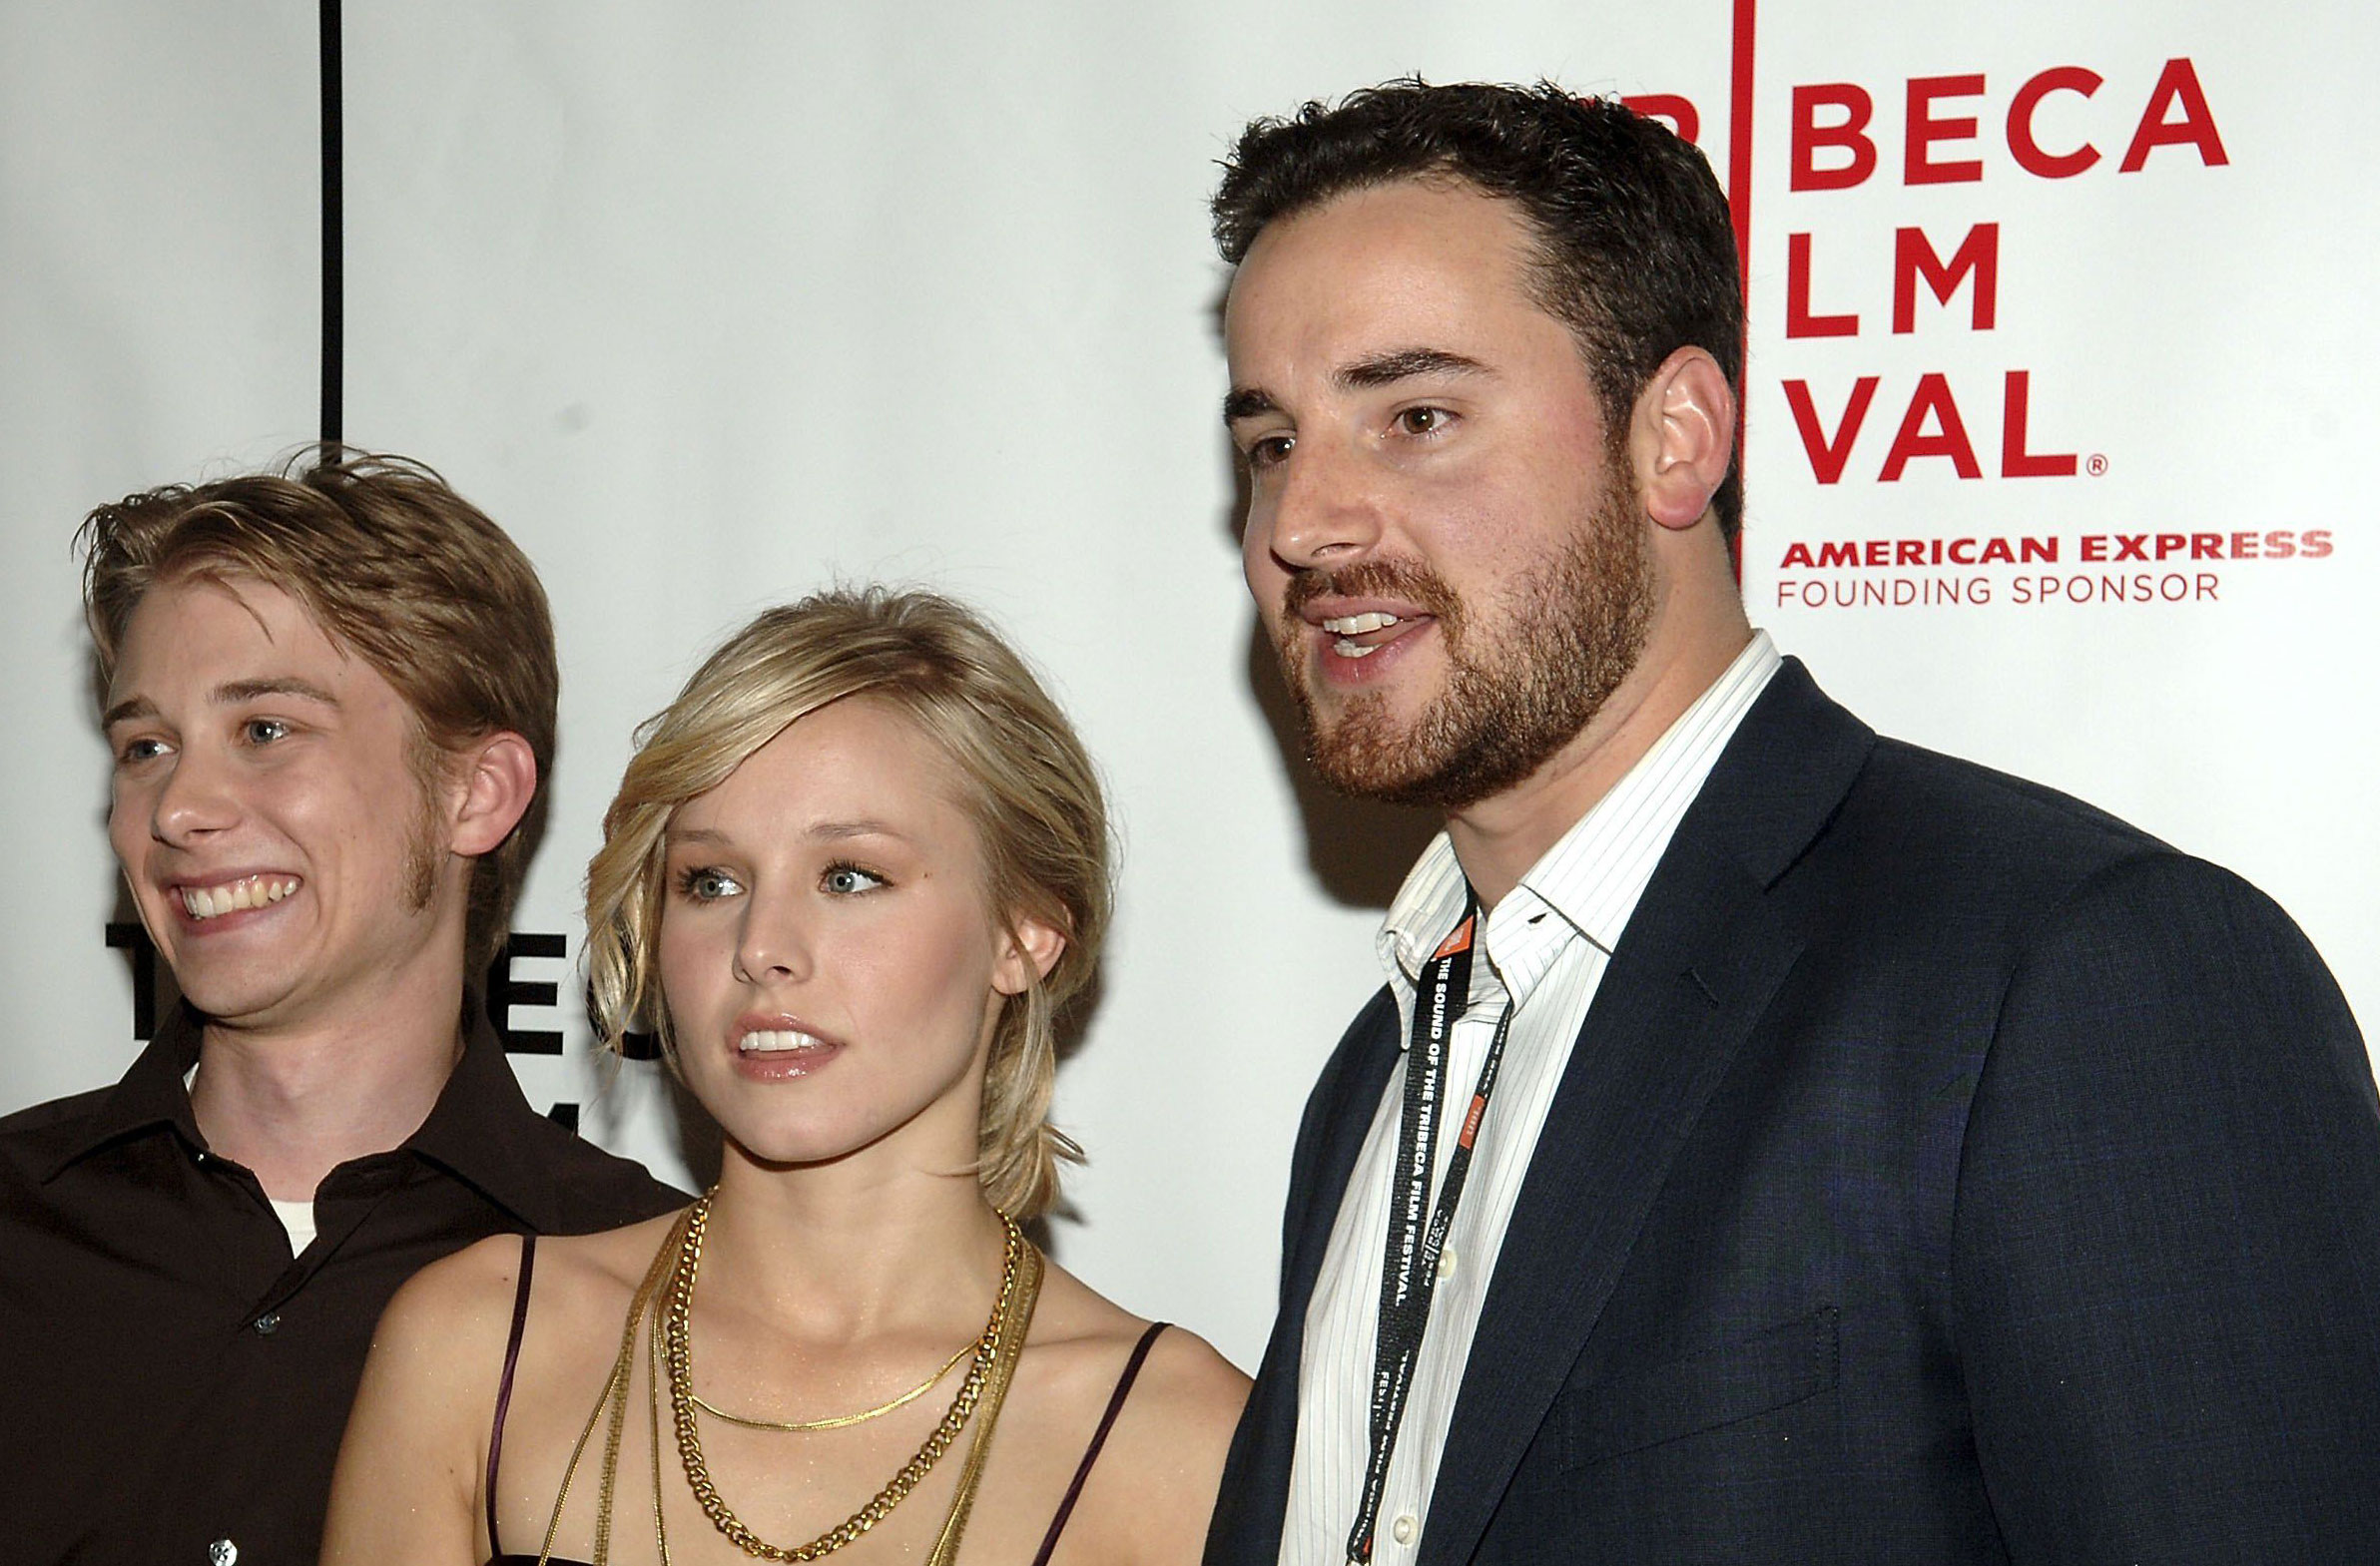 Lou Taylor Pucci, Kristen Bell, and Director Theo Avgerinos. Premiere of 